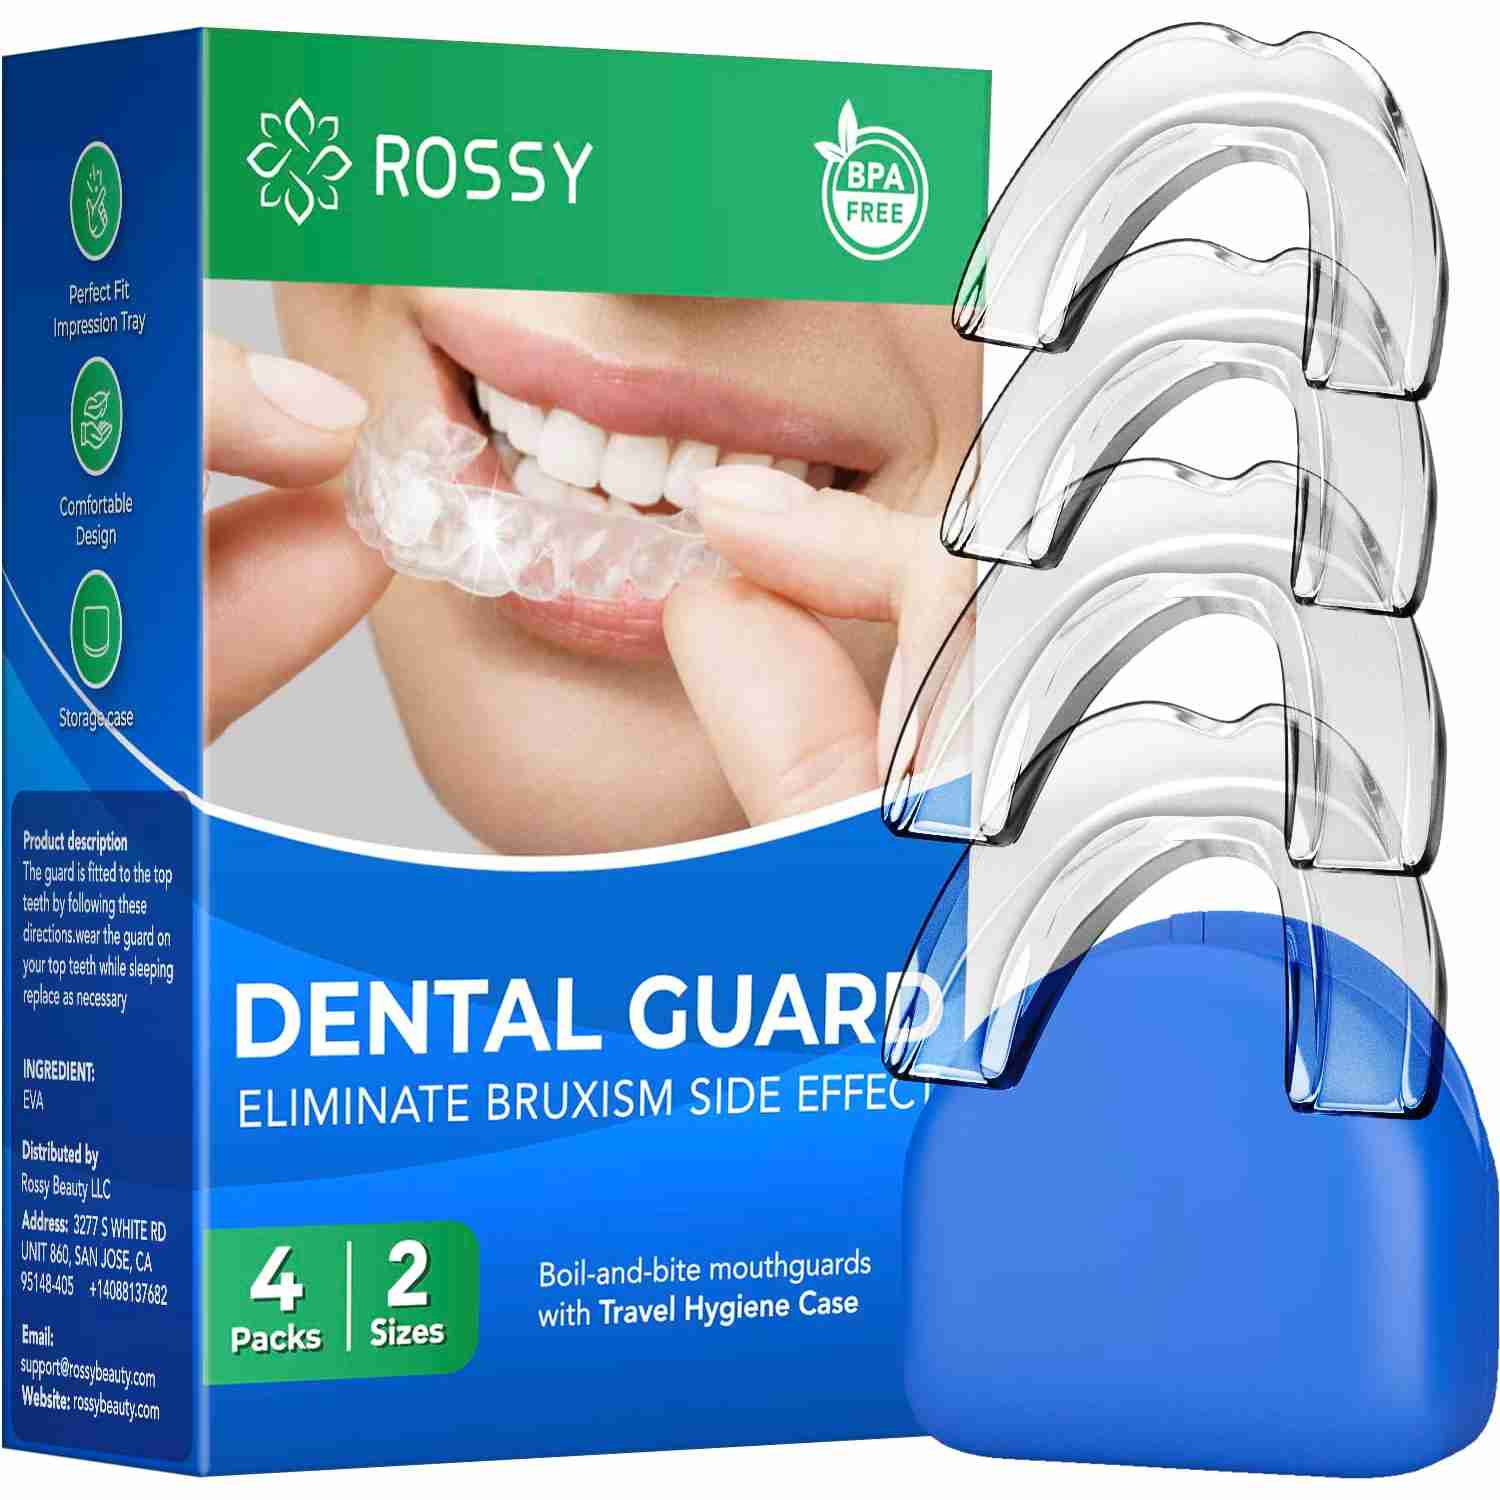 rs-mouth-guard with cash back rebate